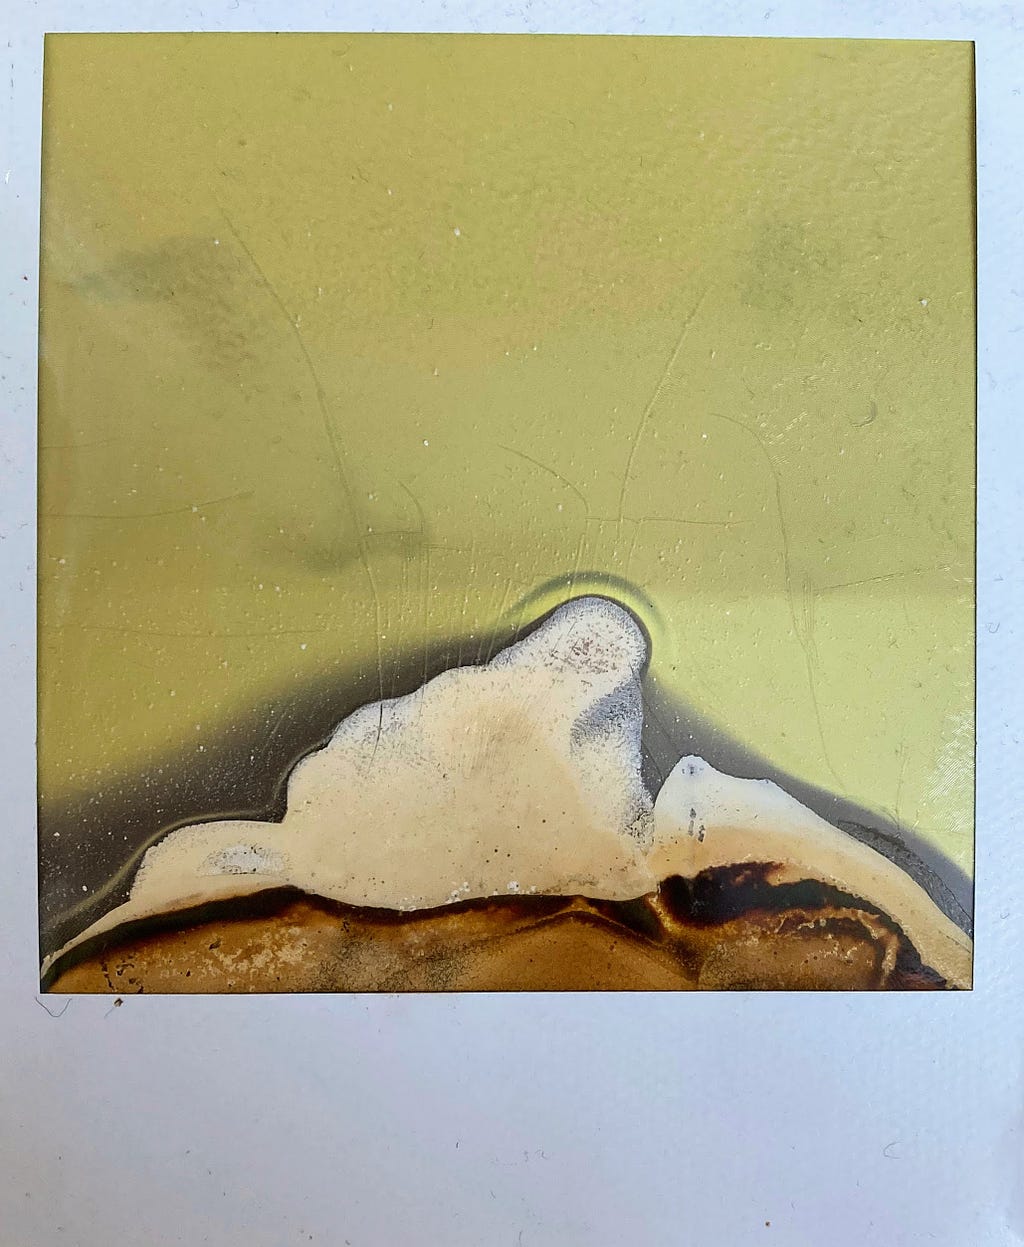 A polaroid photo made with expired film in green-brown sepia tones. The chemicals spread upwards forming a small hill with green-brown and white-ish molten strata. The polaroid itself is old and a bit dusty,and cracked in places.